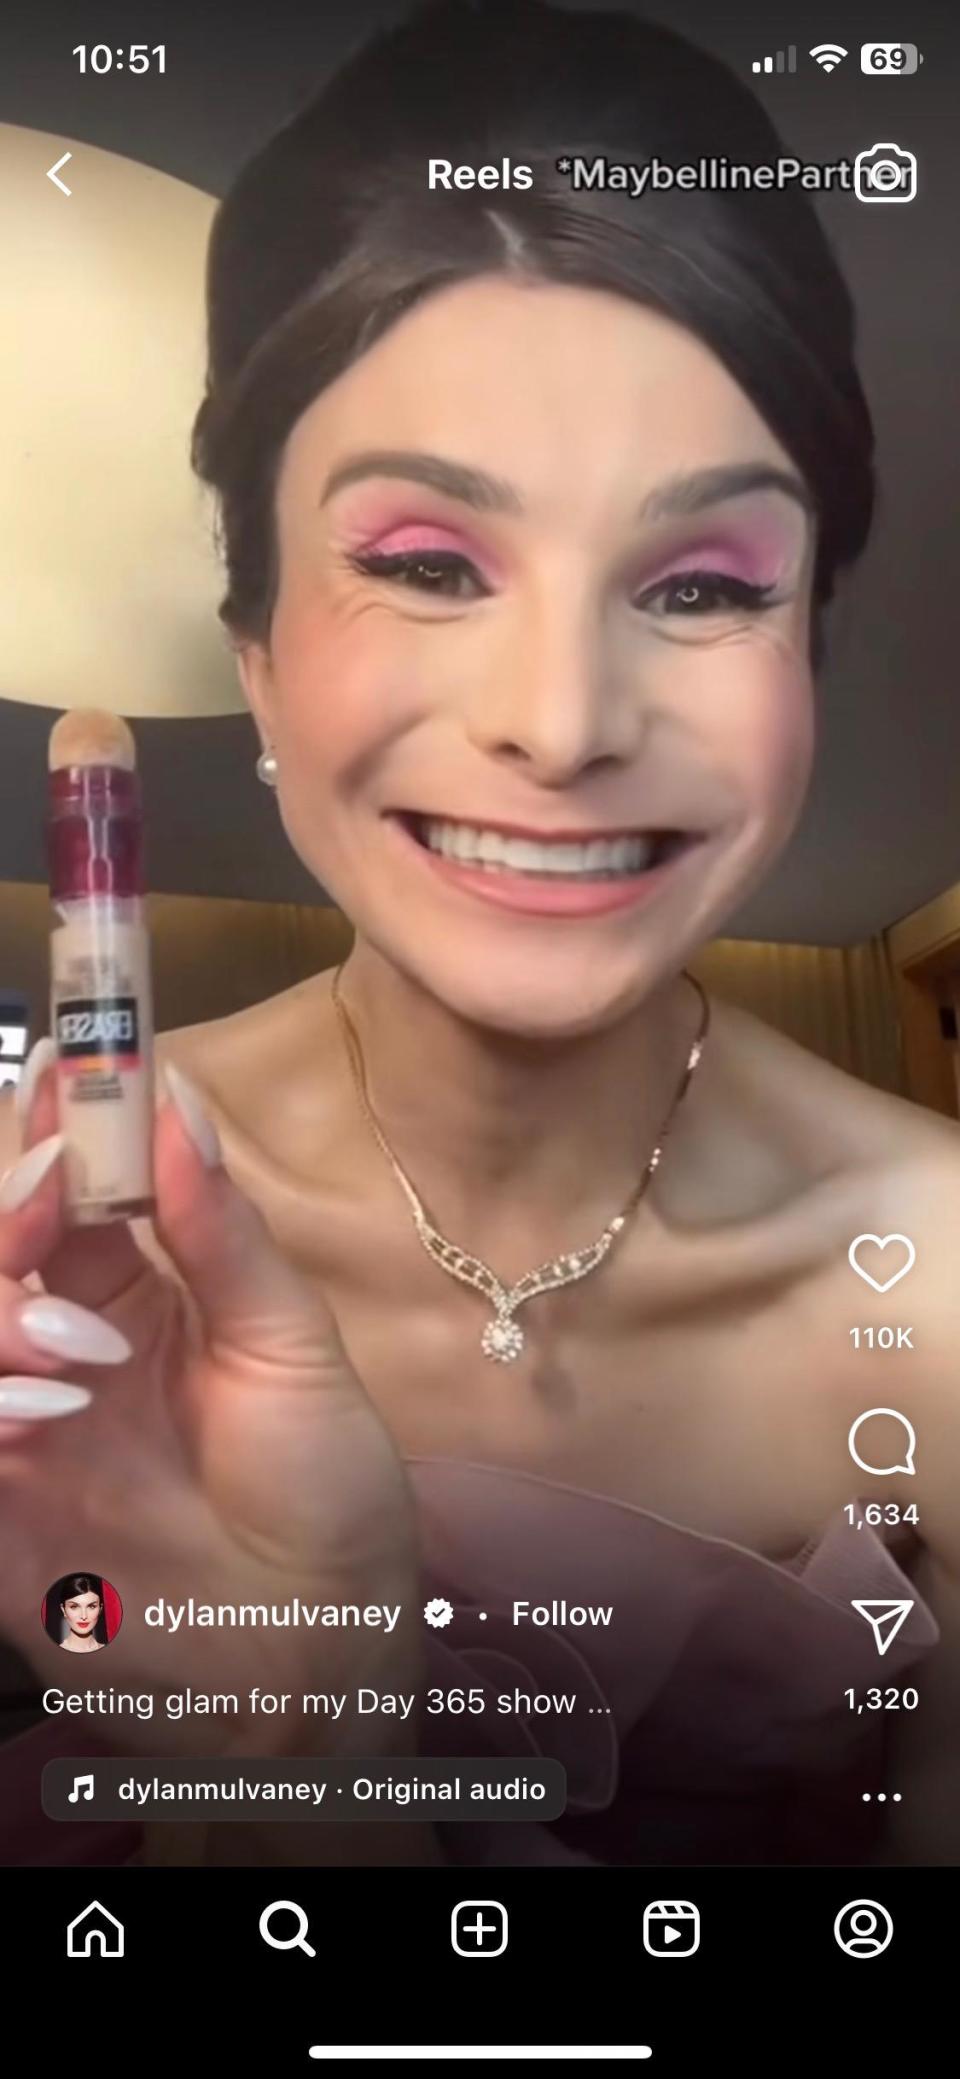 Dylan Mulvaney demonstrates her makeover with the help of Maybelline products, which is now sparking a backlash and calls for a boycott against the cosmetics brand. 